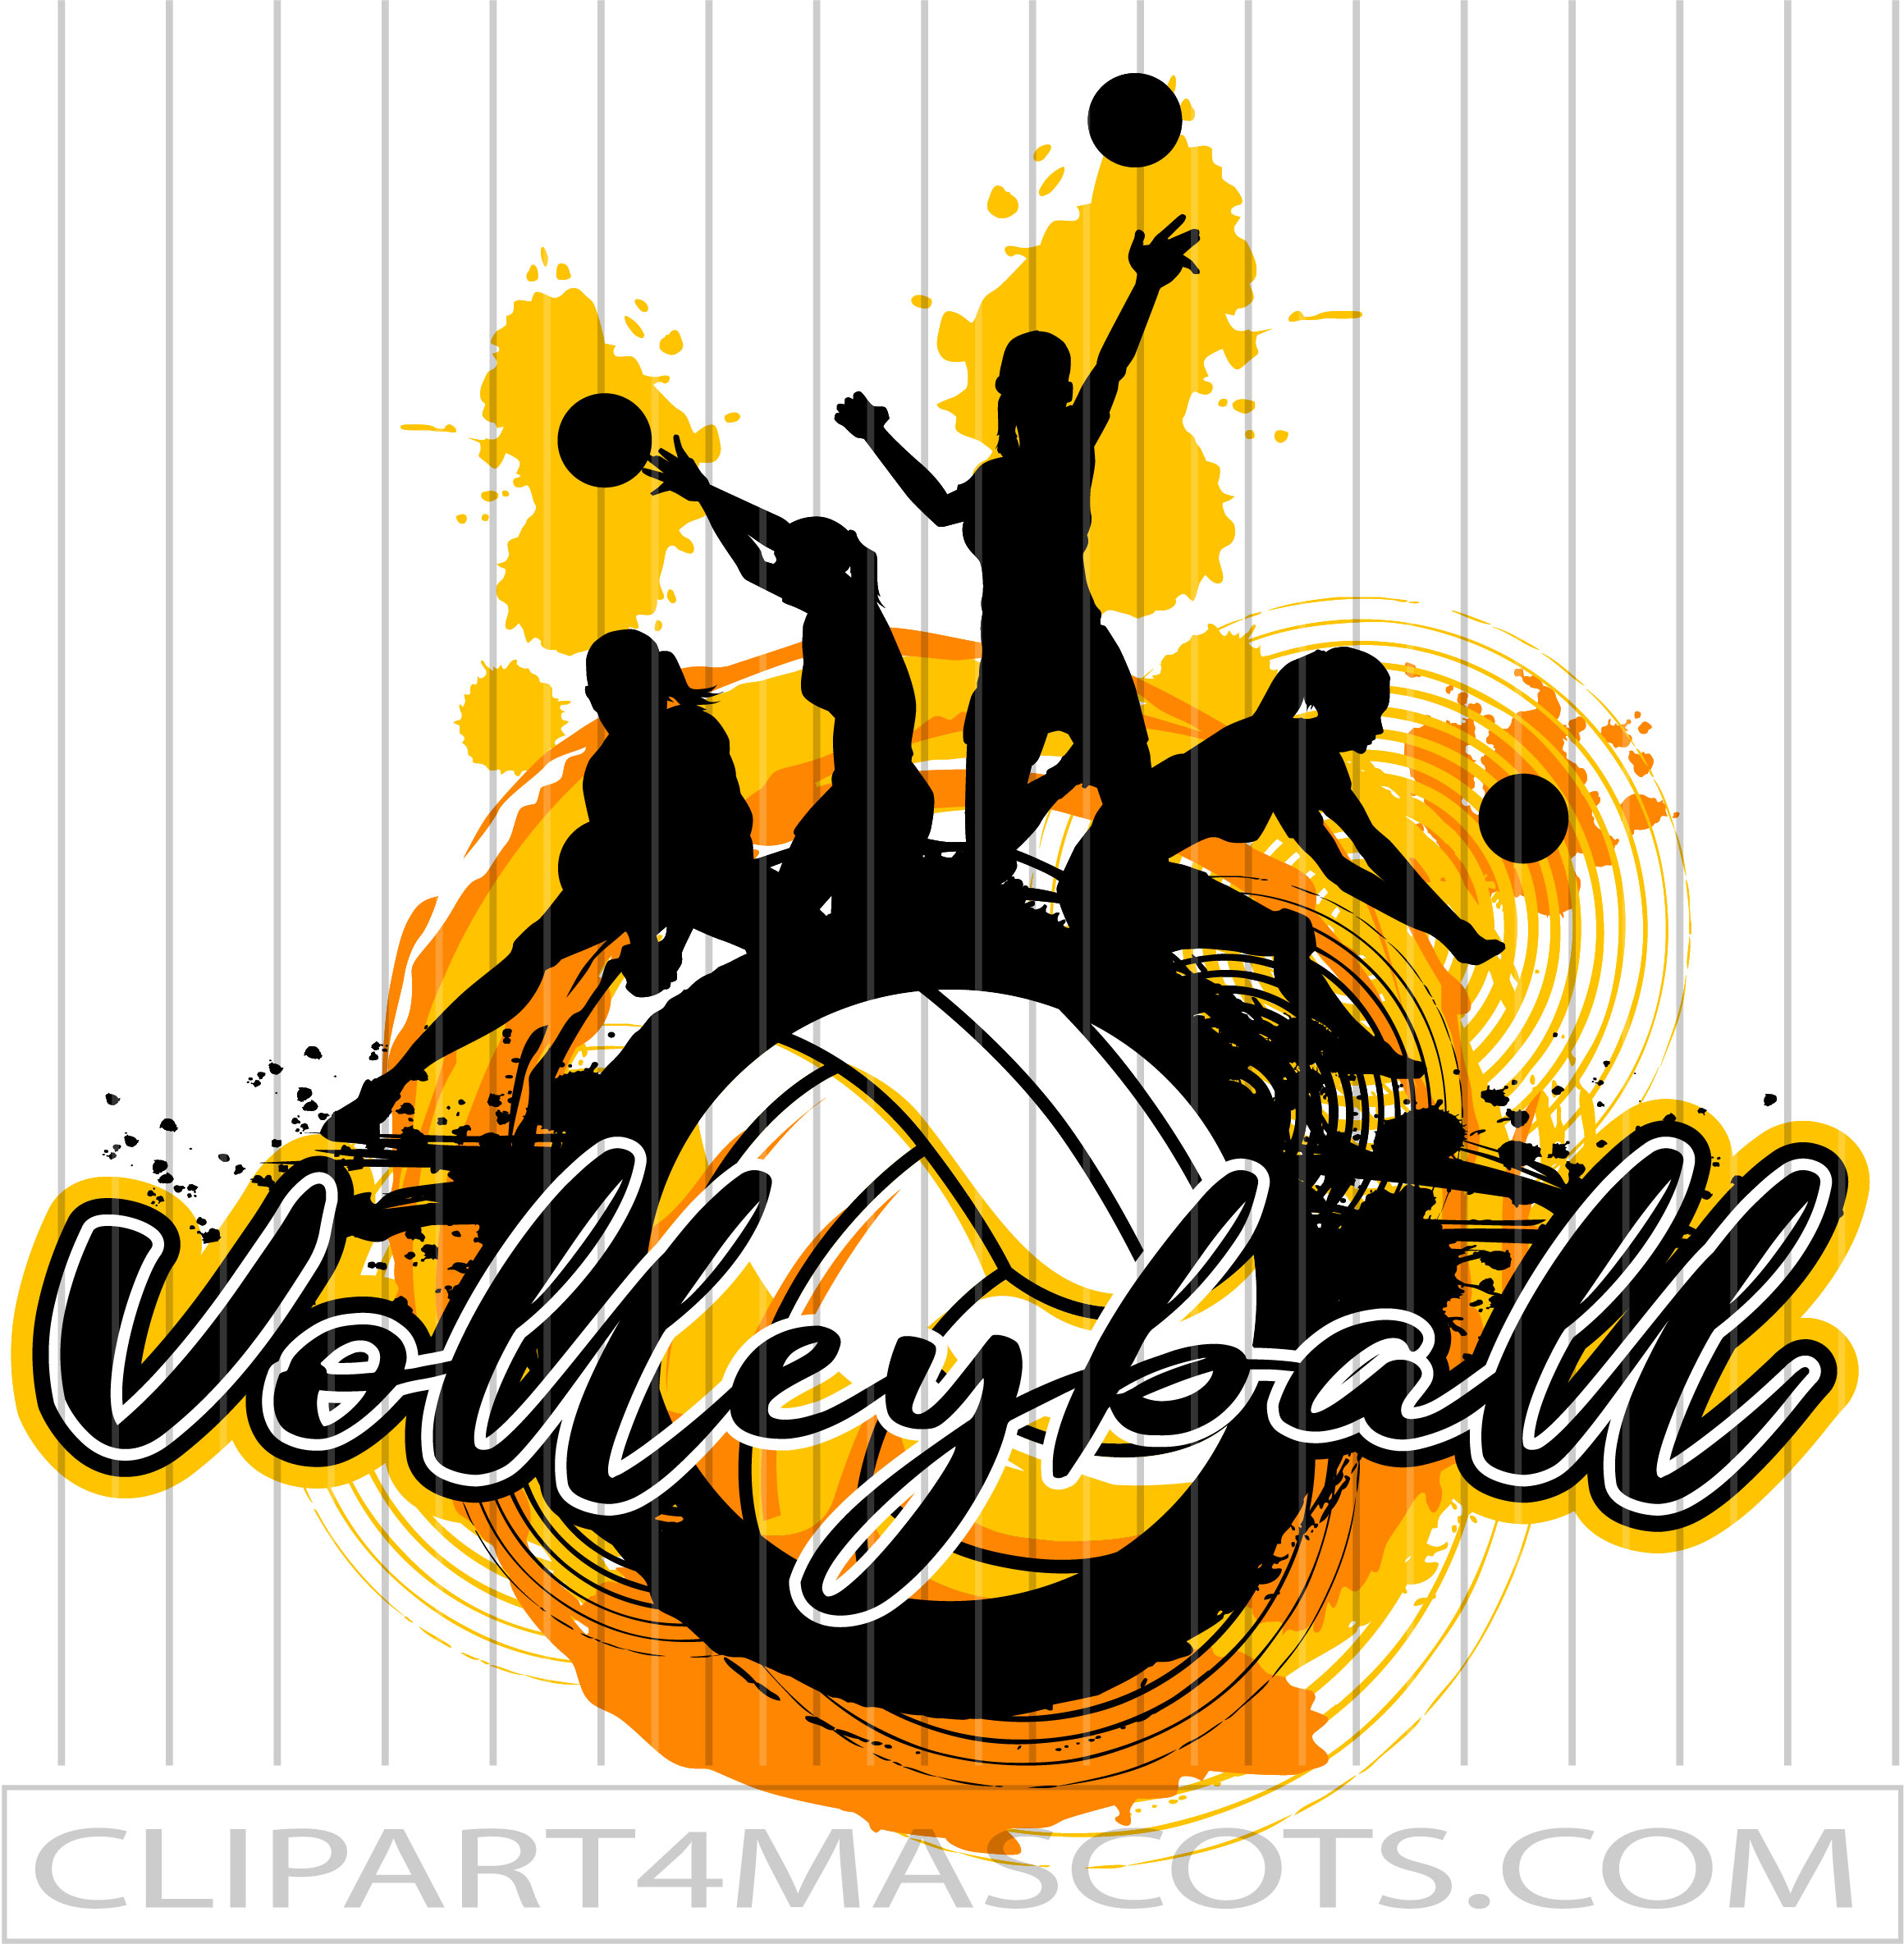 Female Volleyball Silhouettes